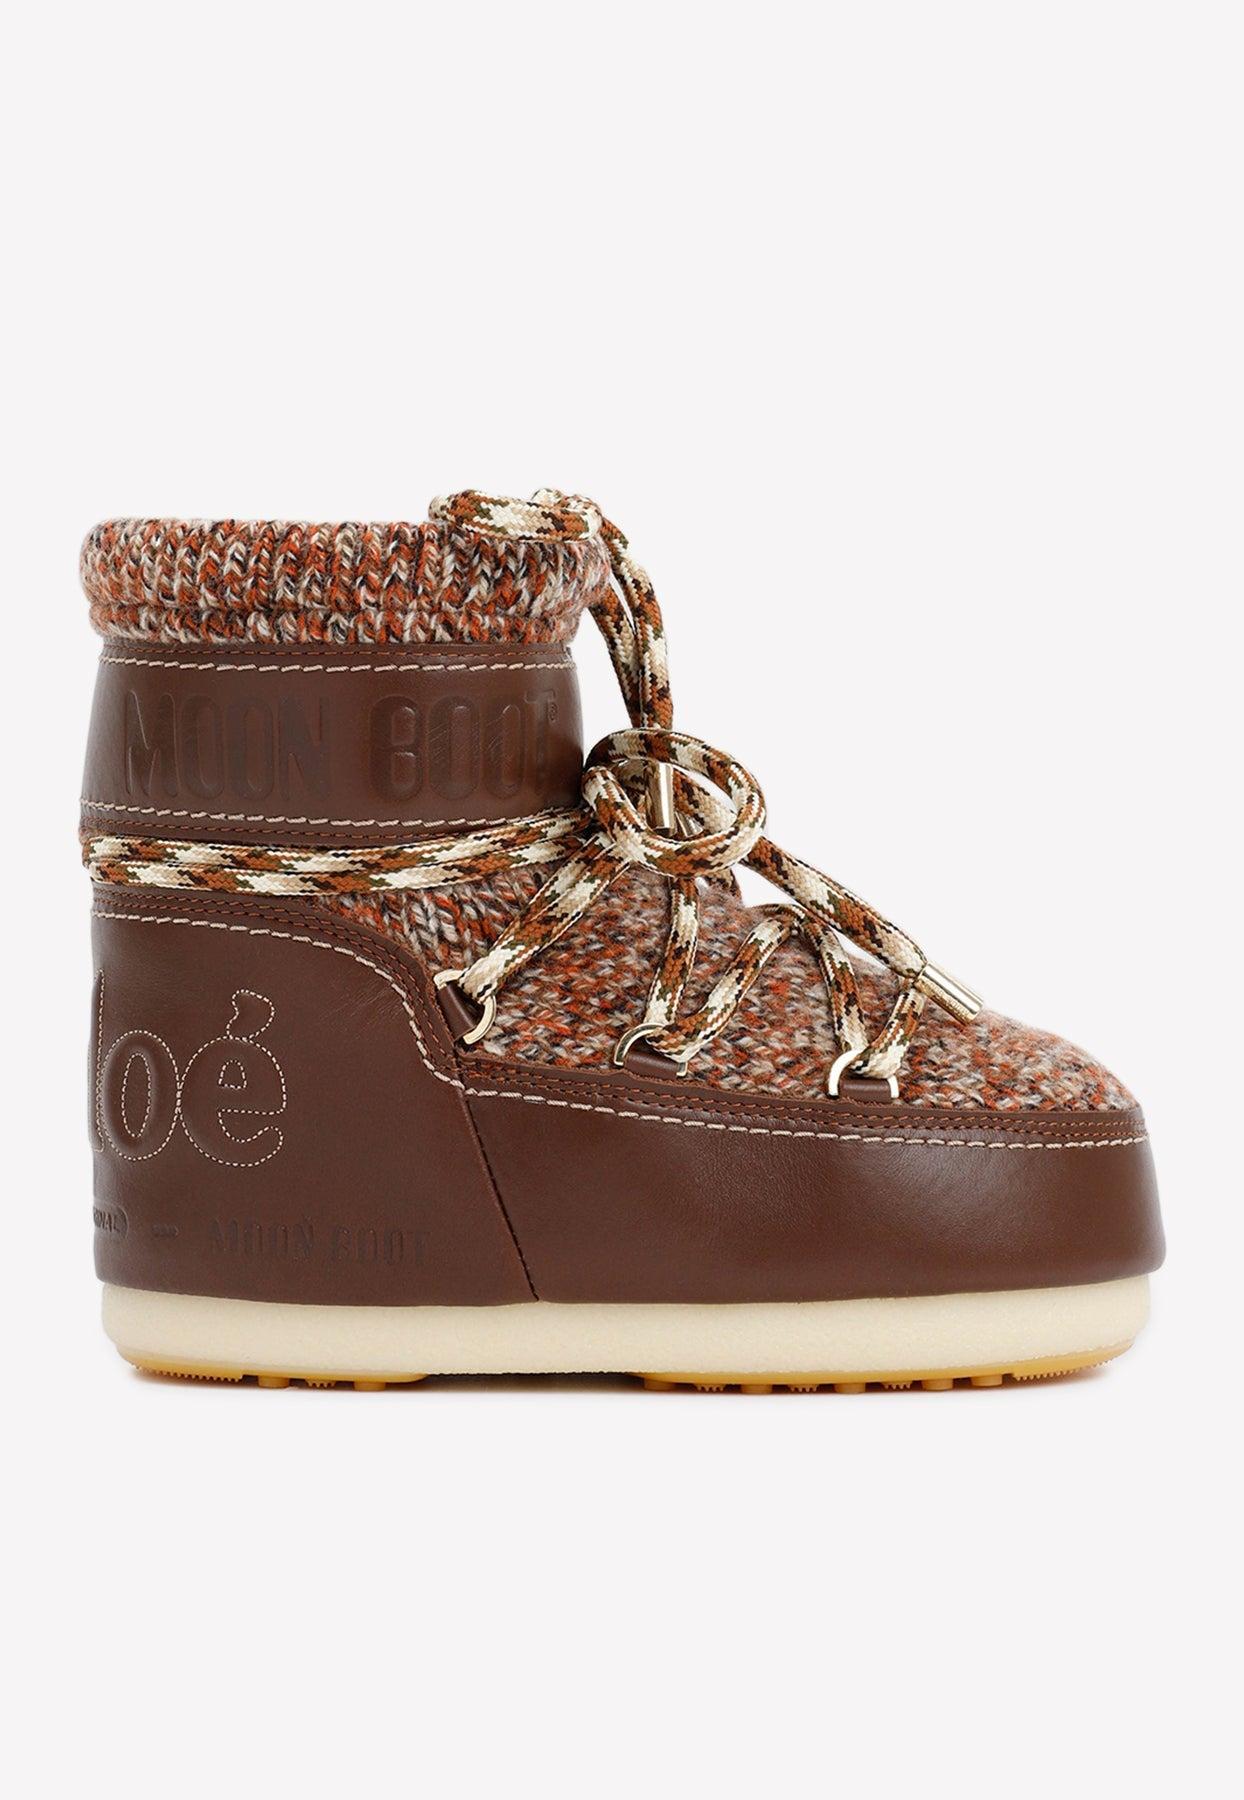 Chloé X Moon Boot Winter Boots in Brown | Lyst